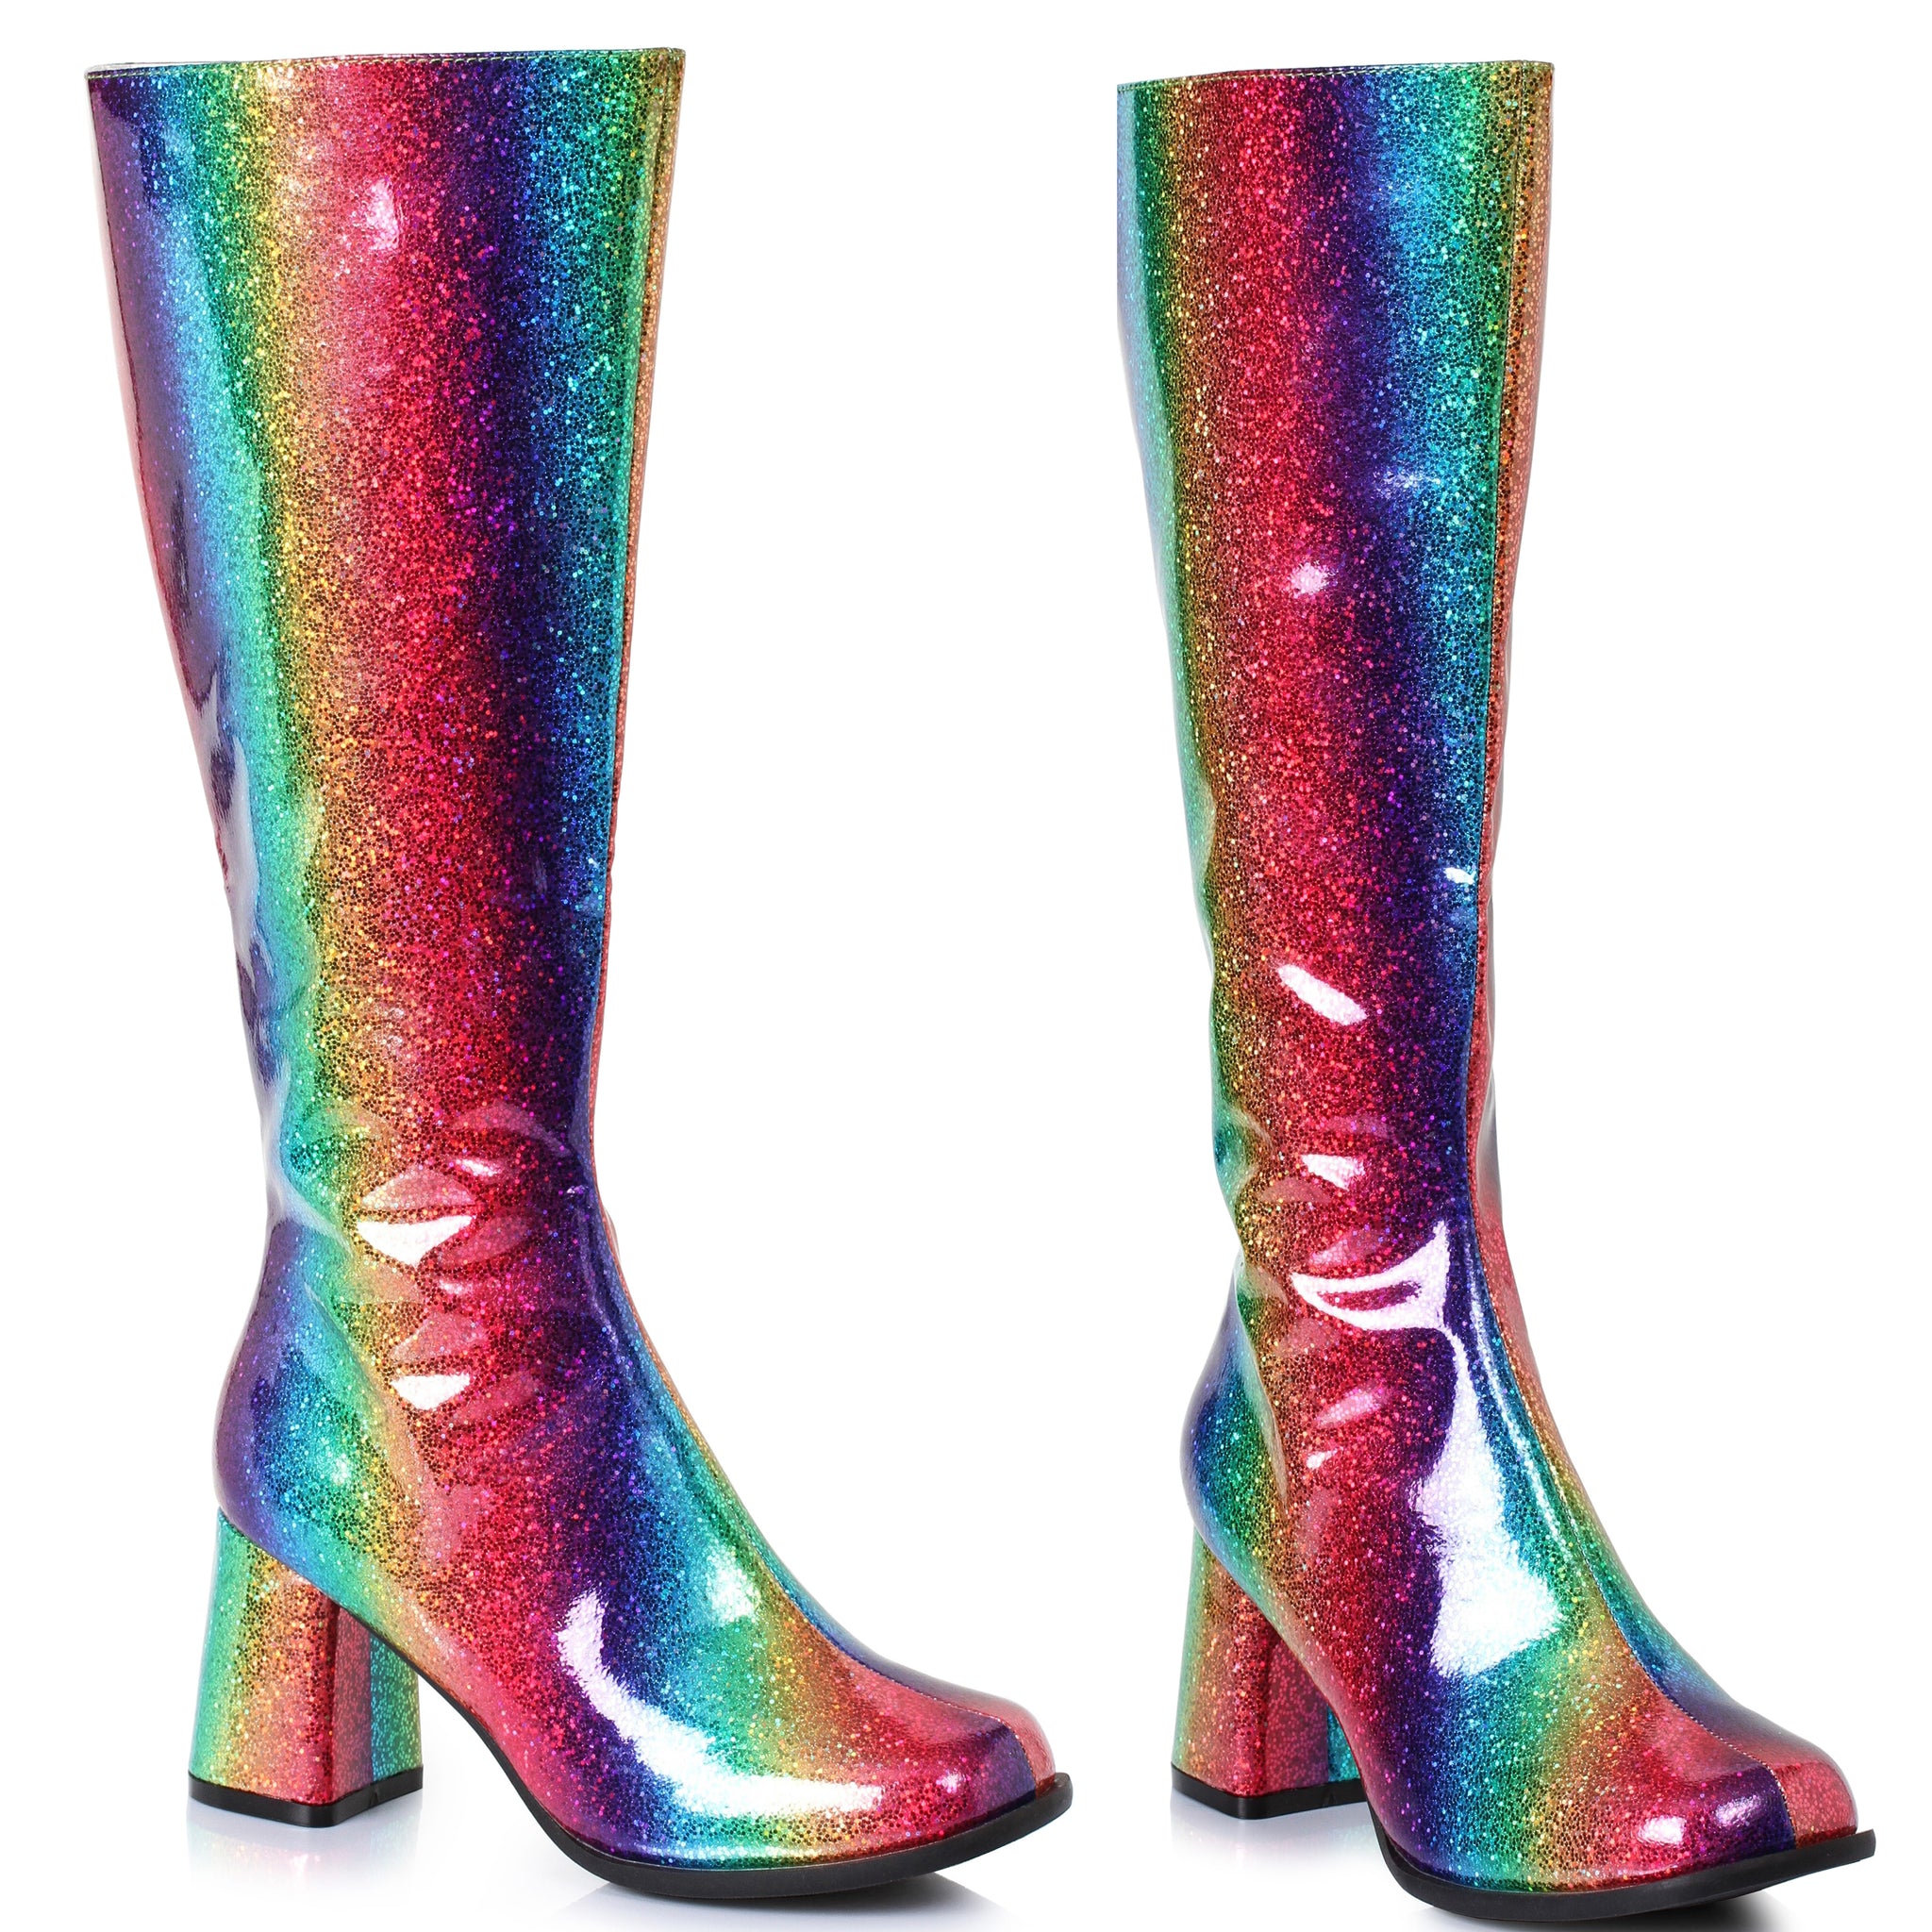 3 Knee High Rainbow Boots With Zipper